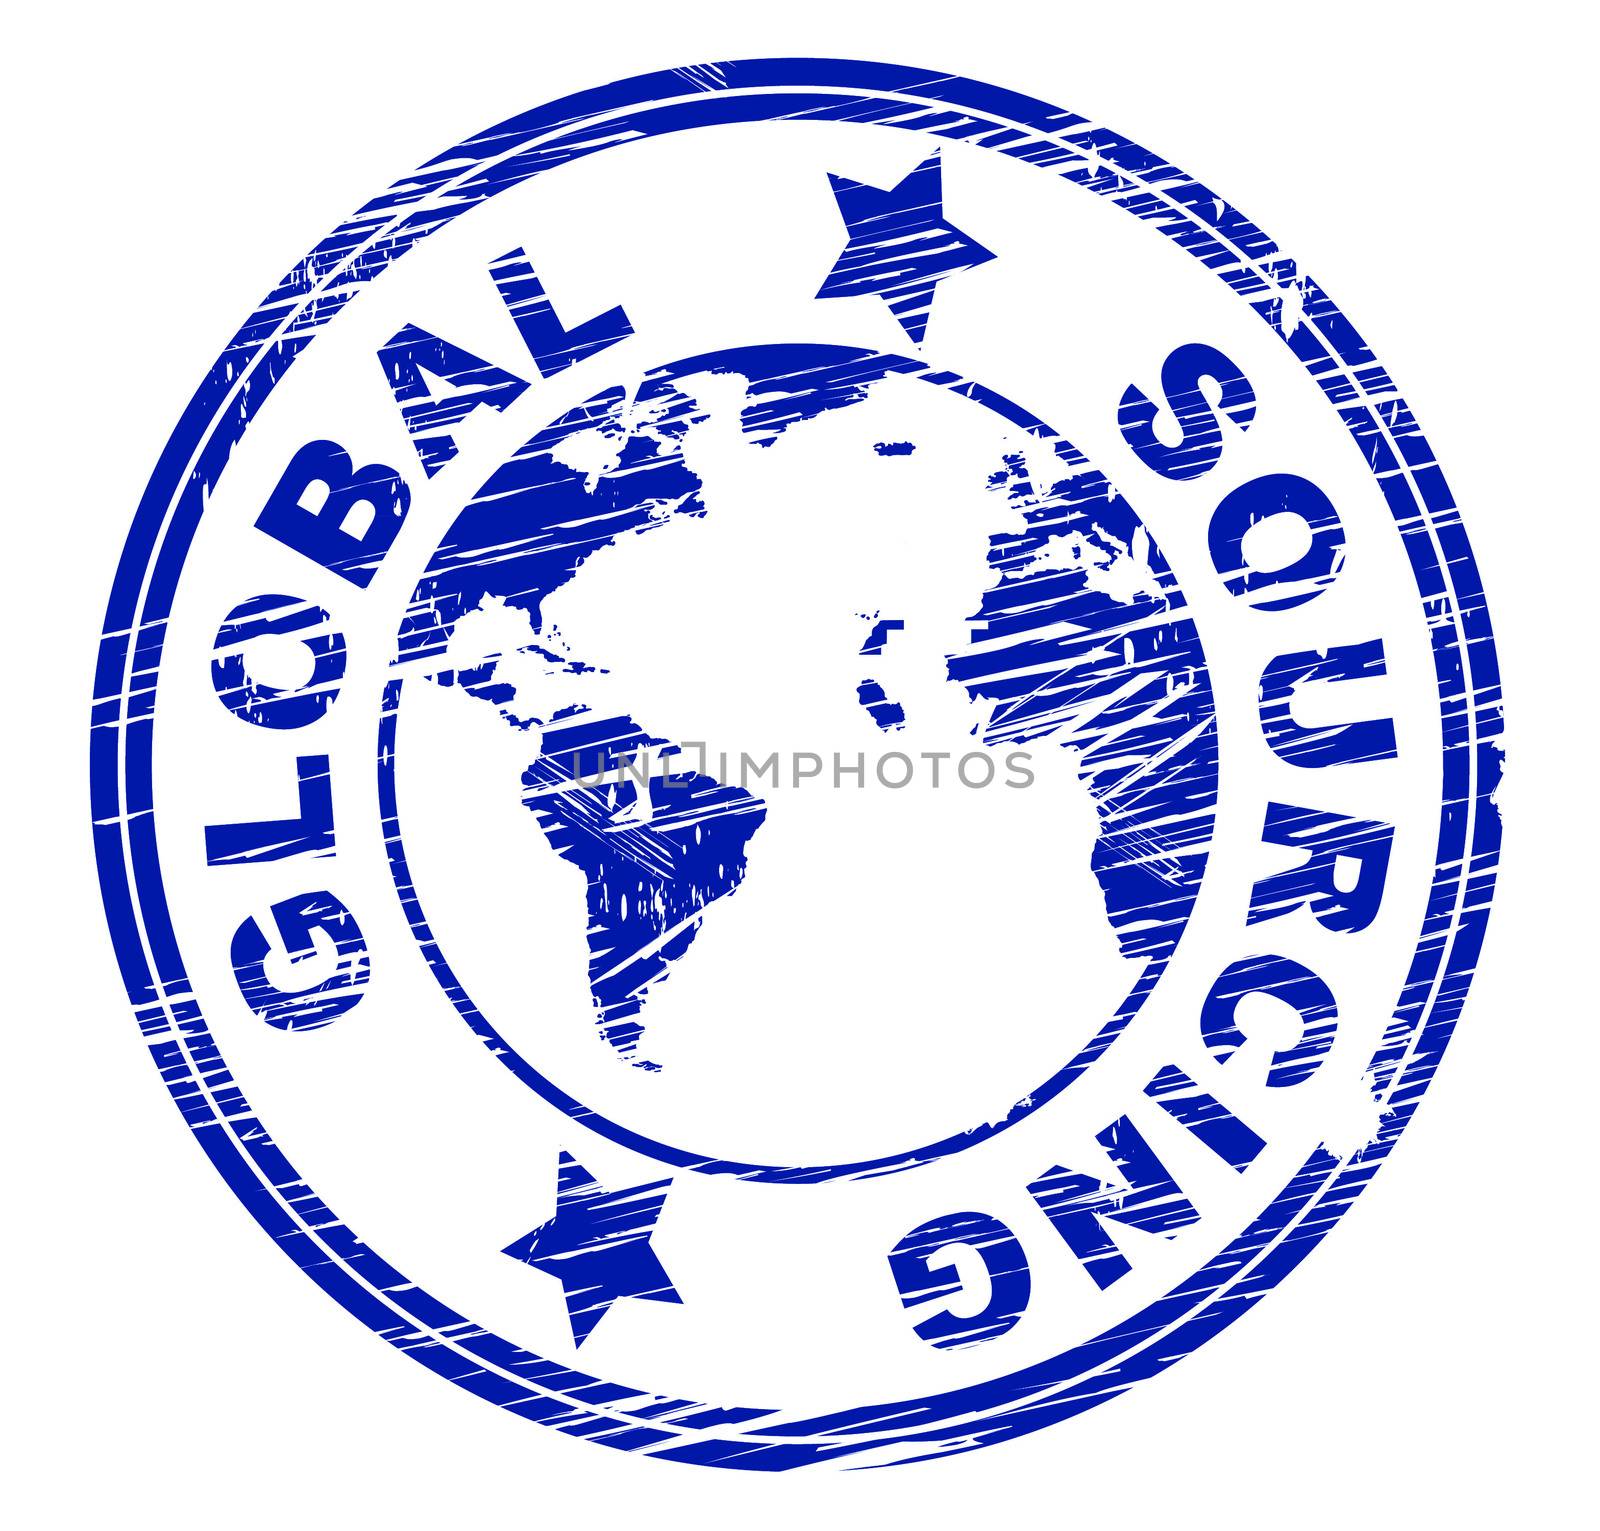 Global Sourcing Representing Worldwide Supplied And Supplies